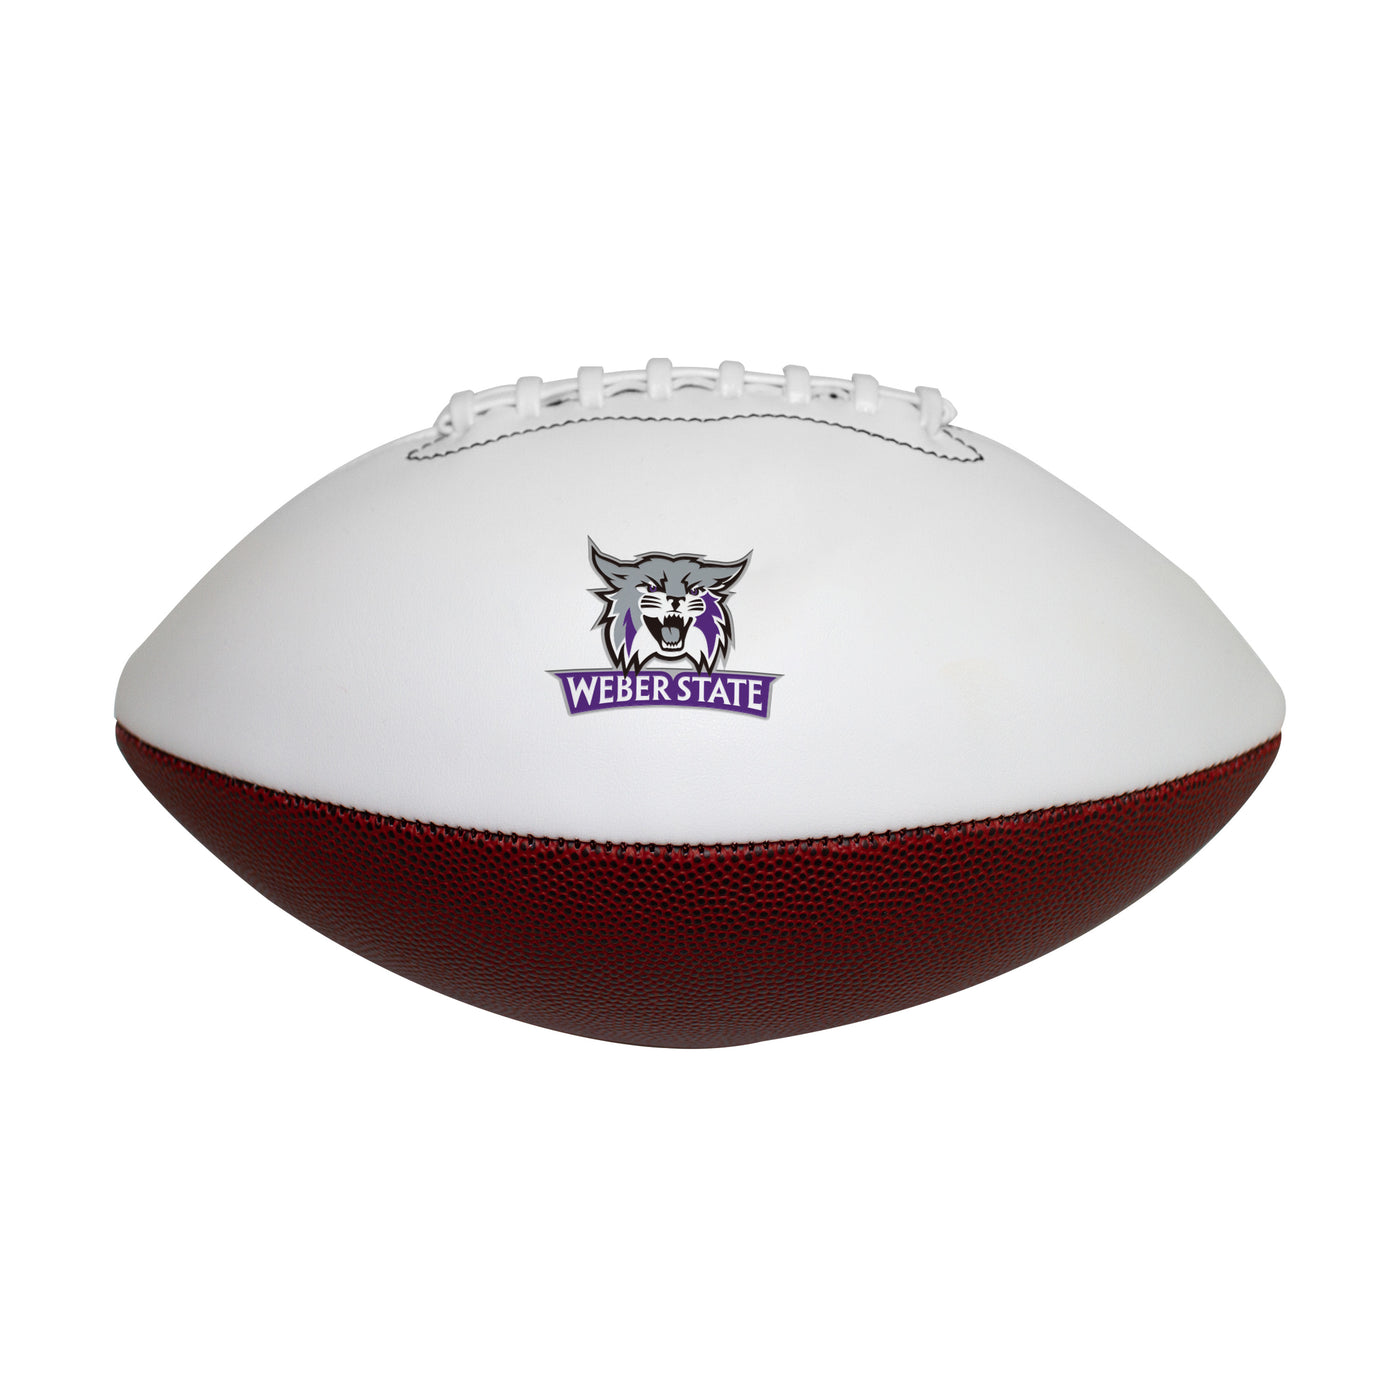 Weber State Full Size Autograph Football